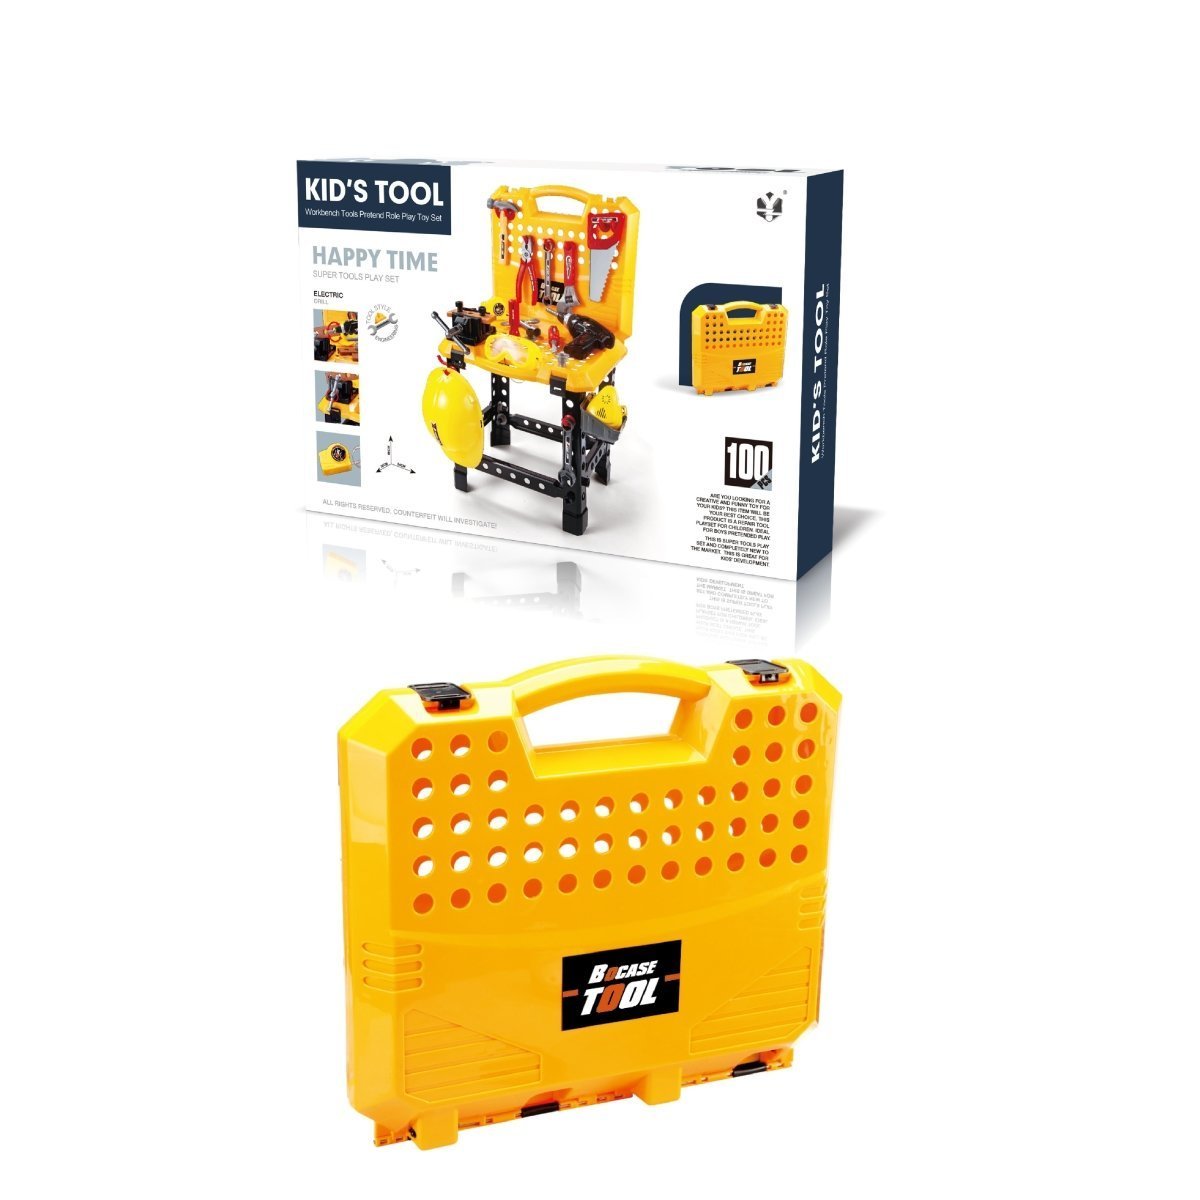 Toy Power Workbench, Kids Power Tool Bench Construction Set with Tools and Electric Drill - Little Kids Business